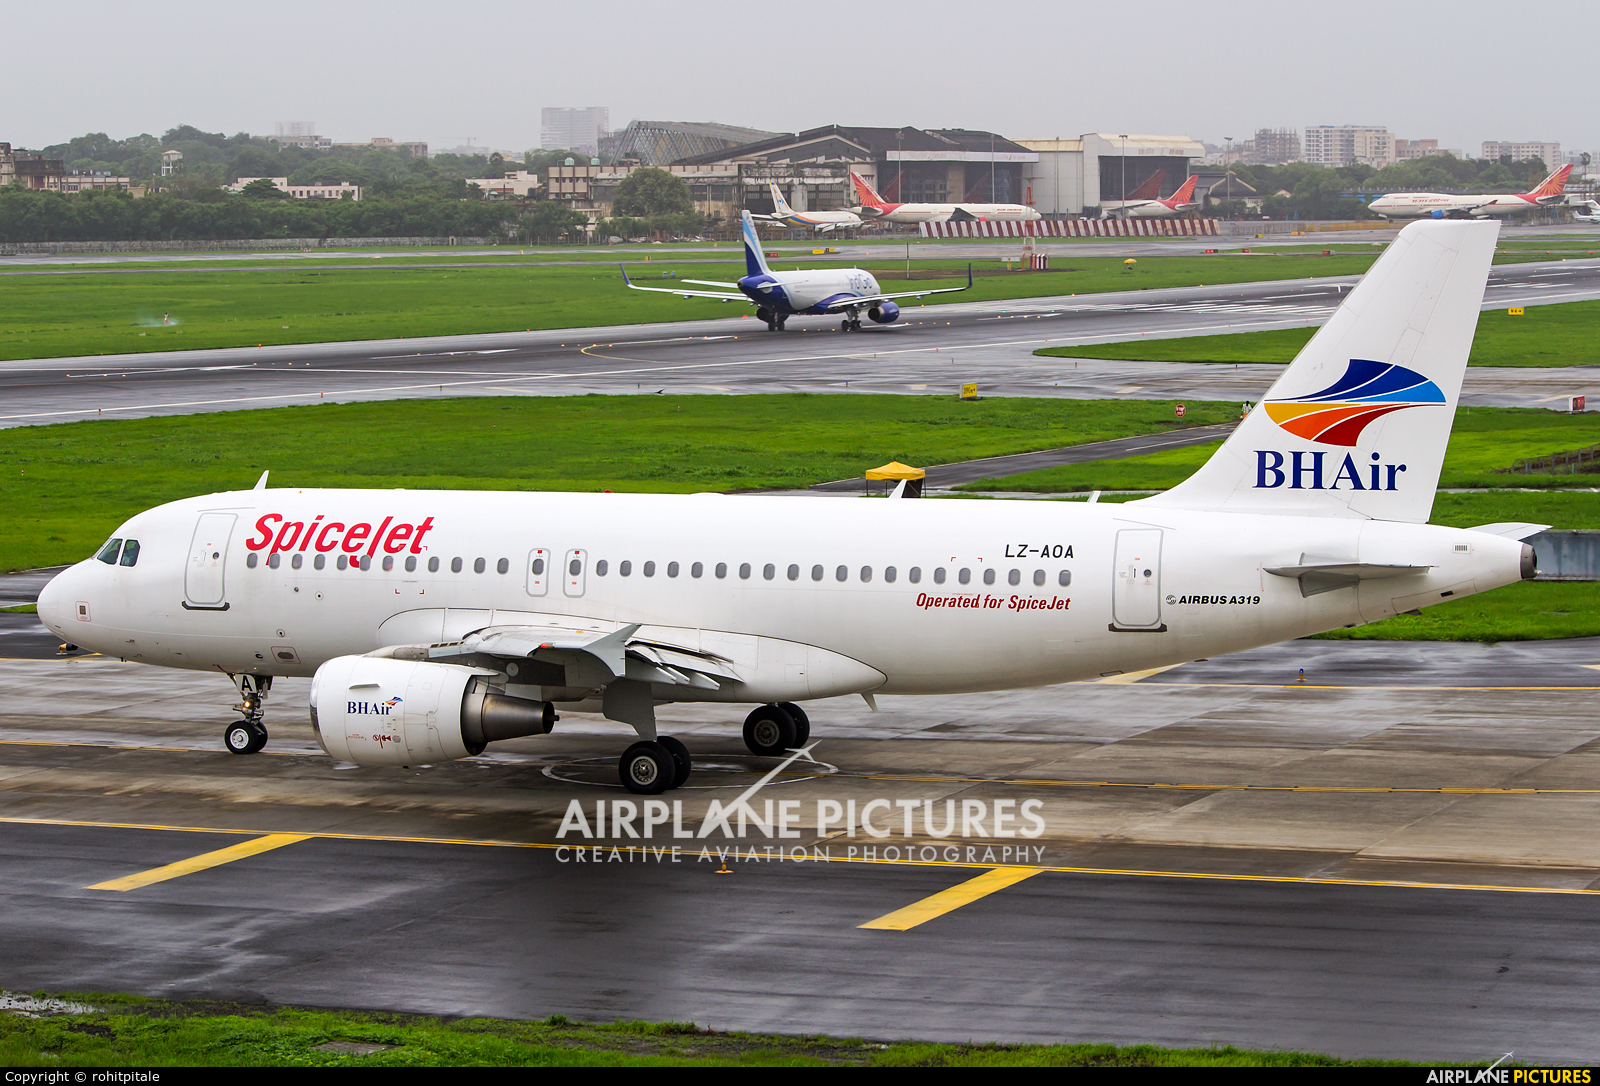 Spicejet aircraft images - lol you mad bro pictures air ...